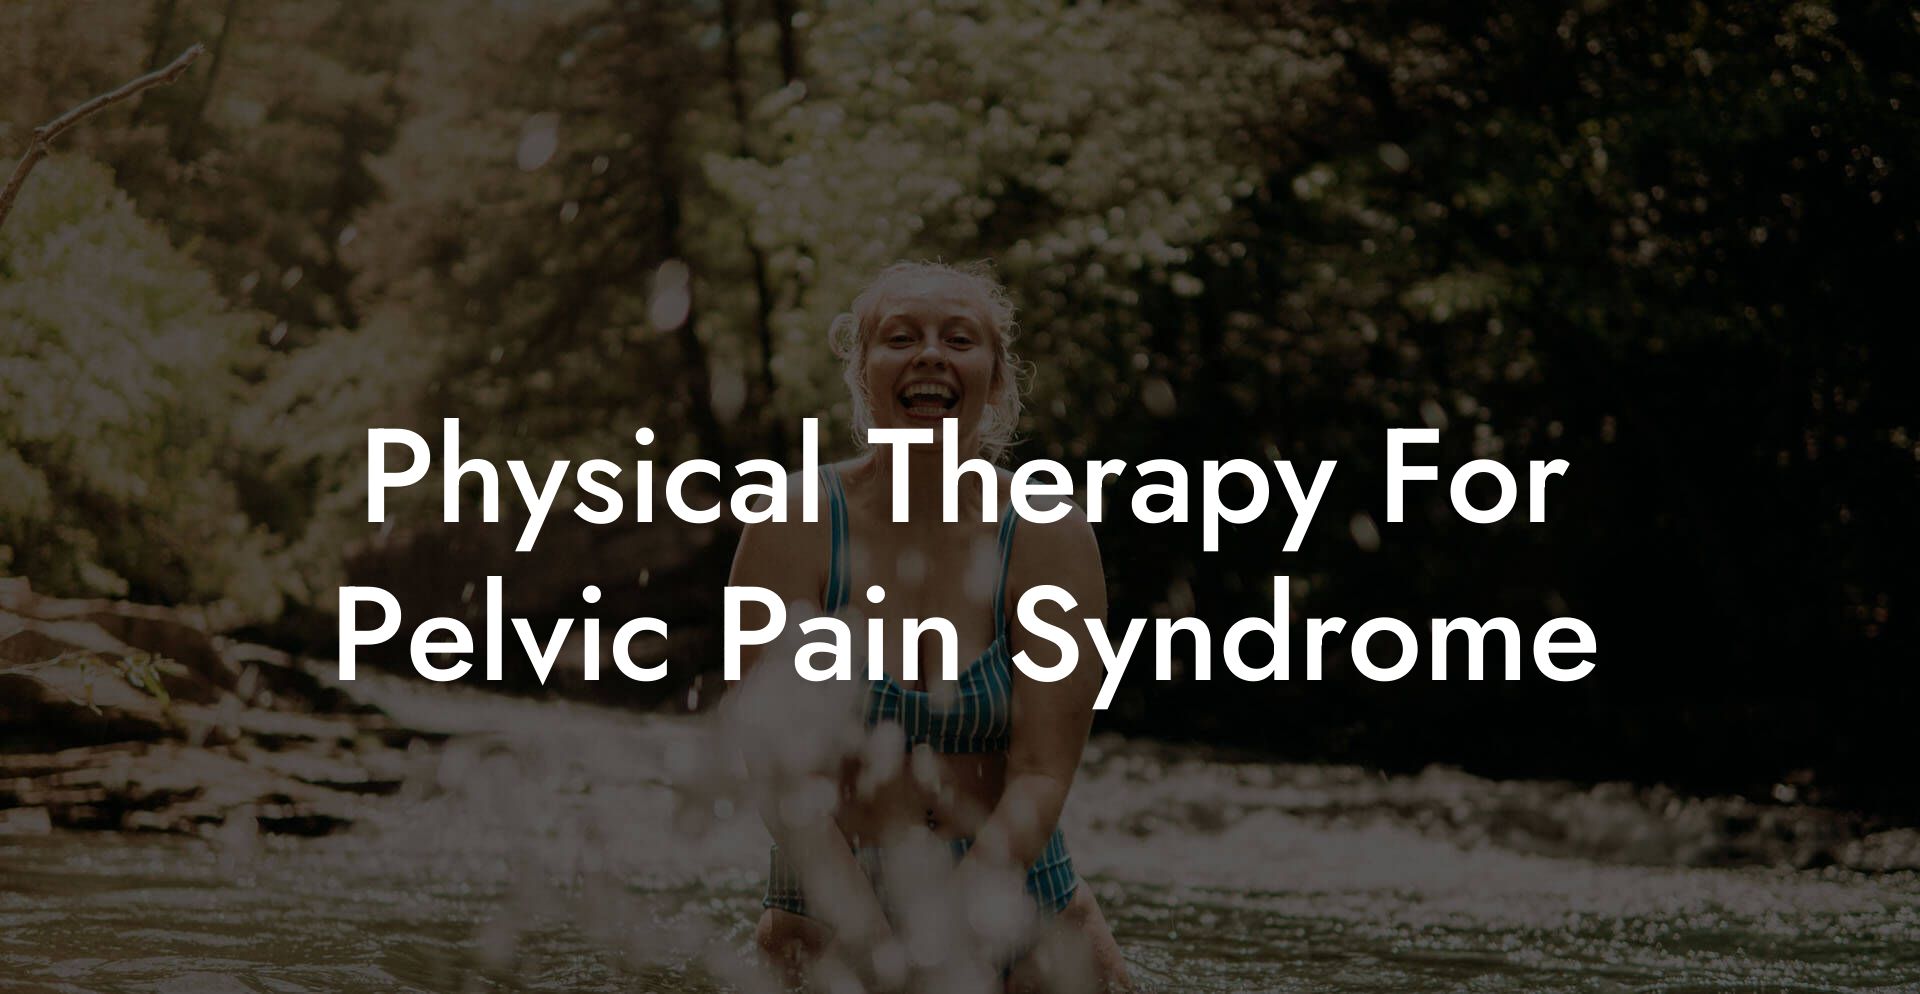 Physical Therapy For Pelvic Pain Syndrome